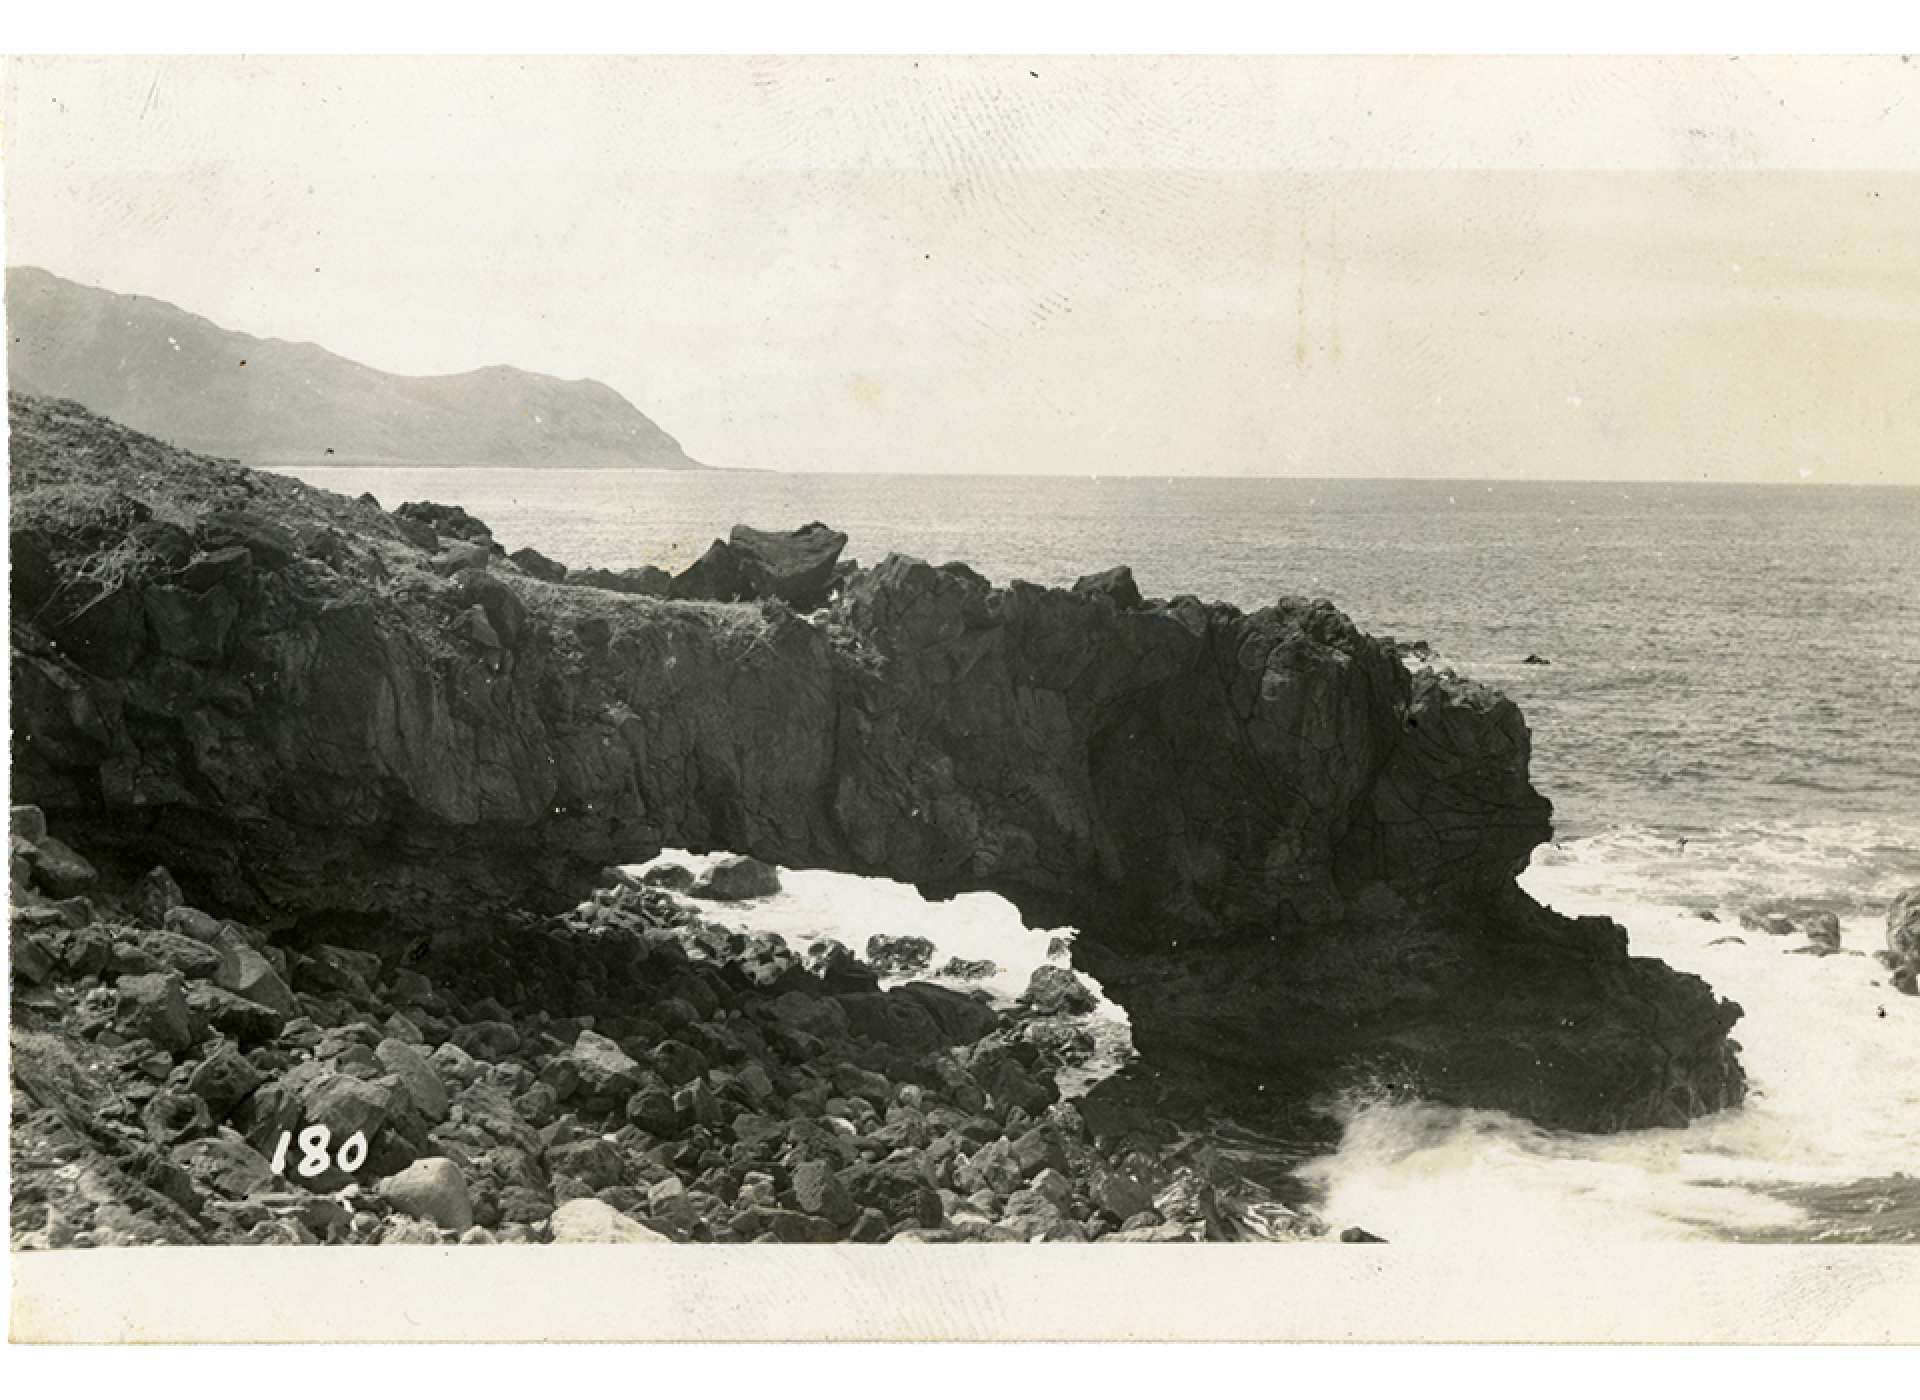 A natural arch formed on the rocky coastline, November 1945